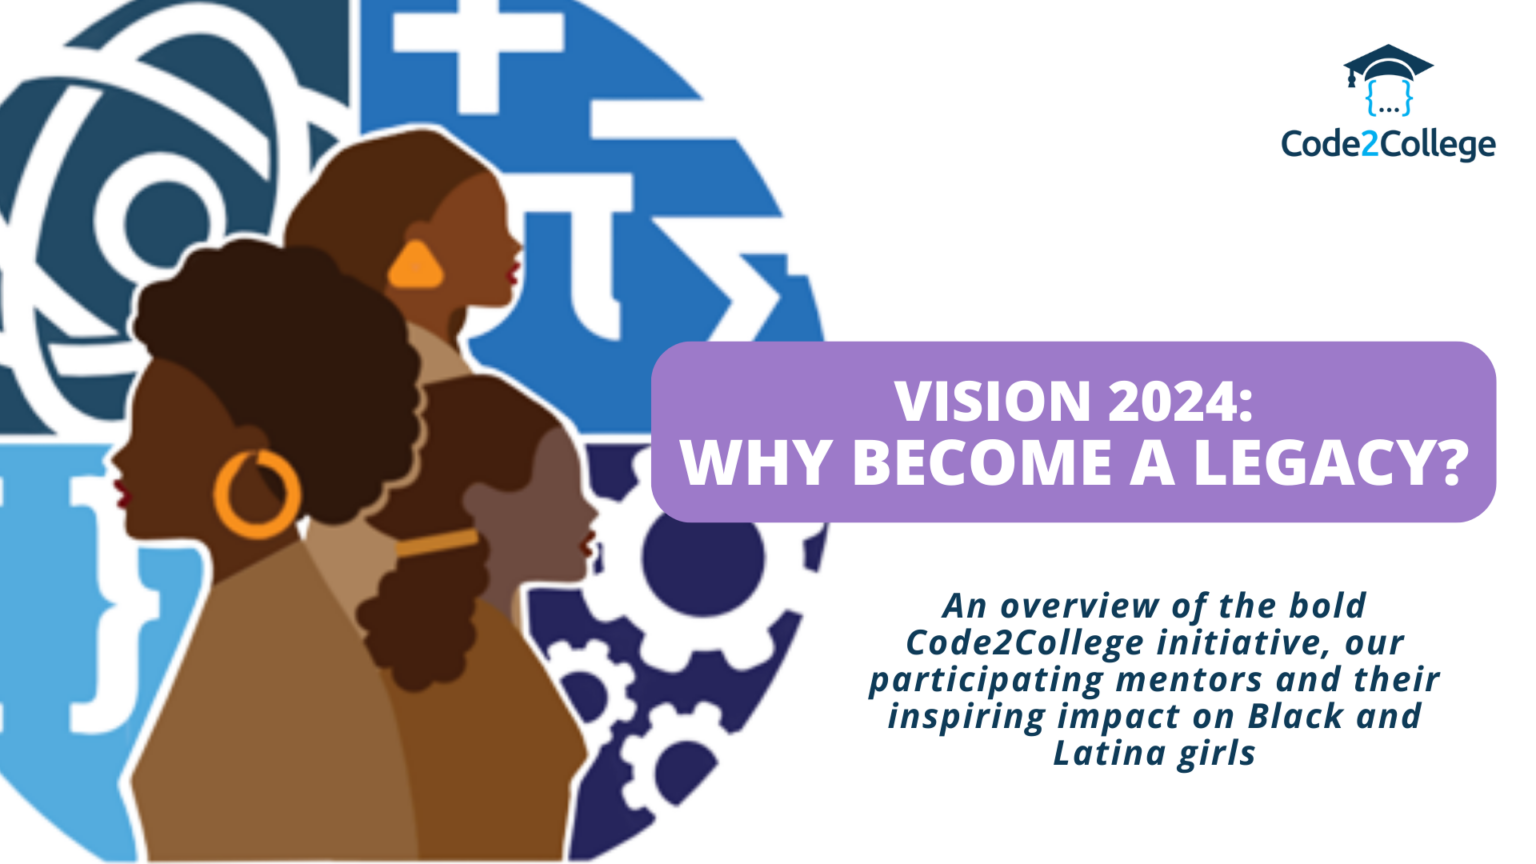 VISION 2024 WHY A LEGACY? • Code2College